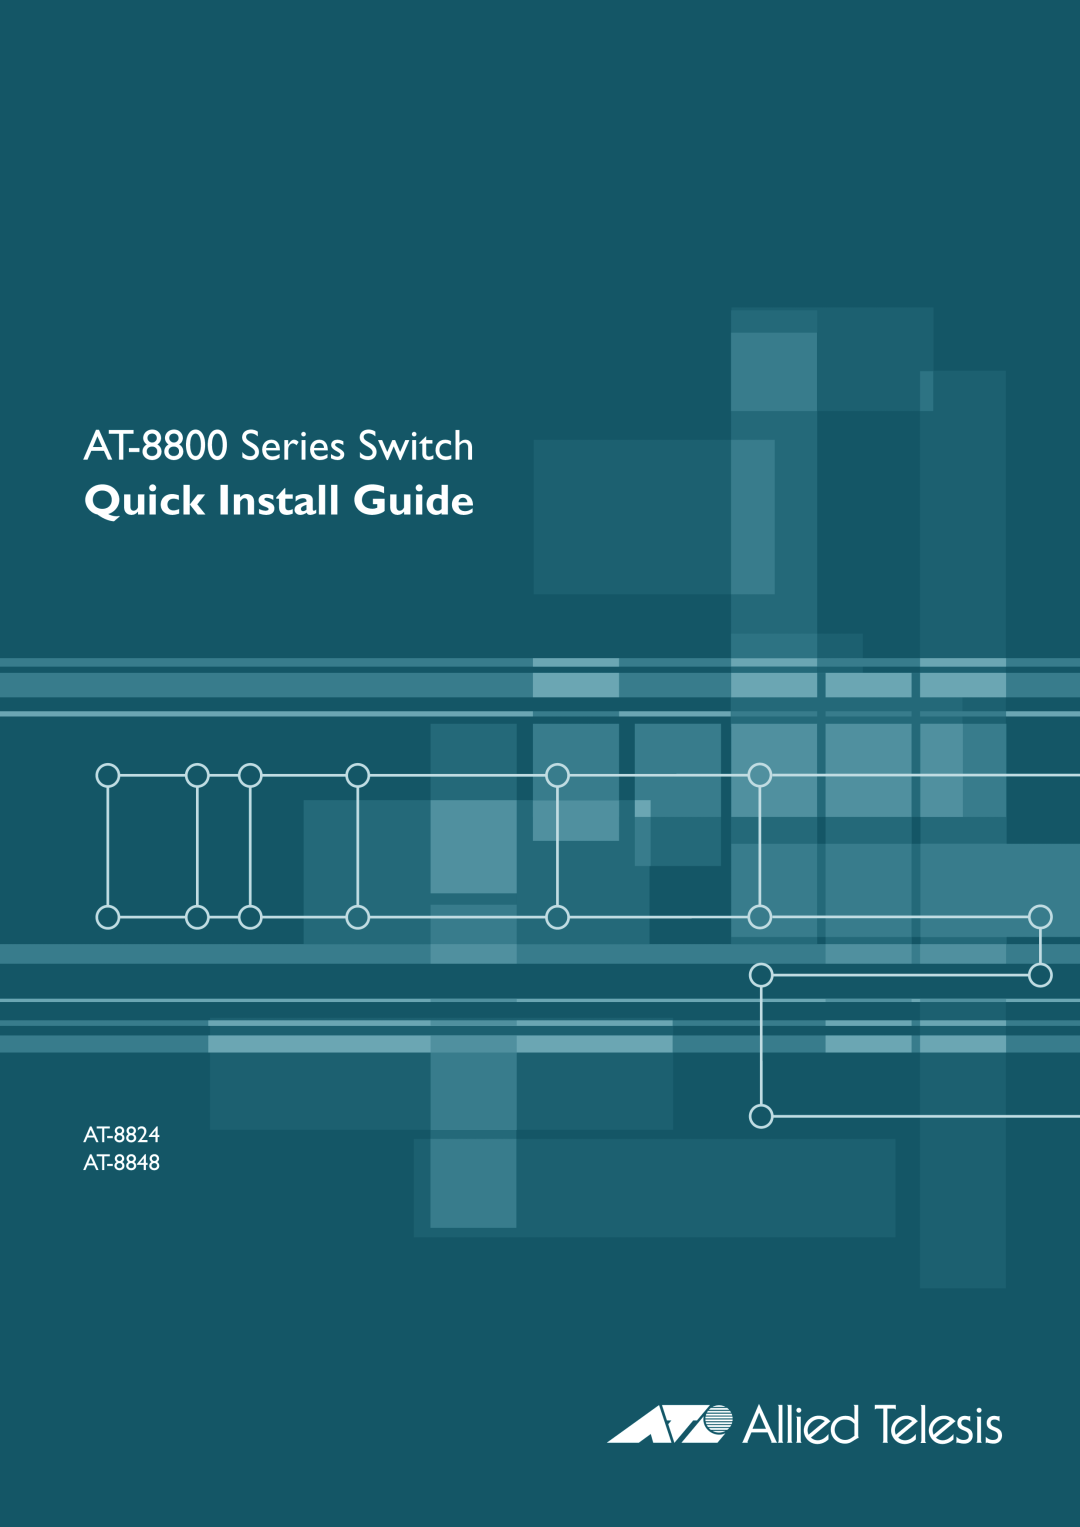 Allied Telesis AT-8824 manual Quick Install Guide, AT-8800 Series Switch, AT-8848 